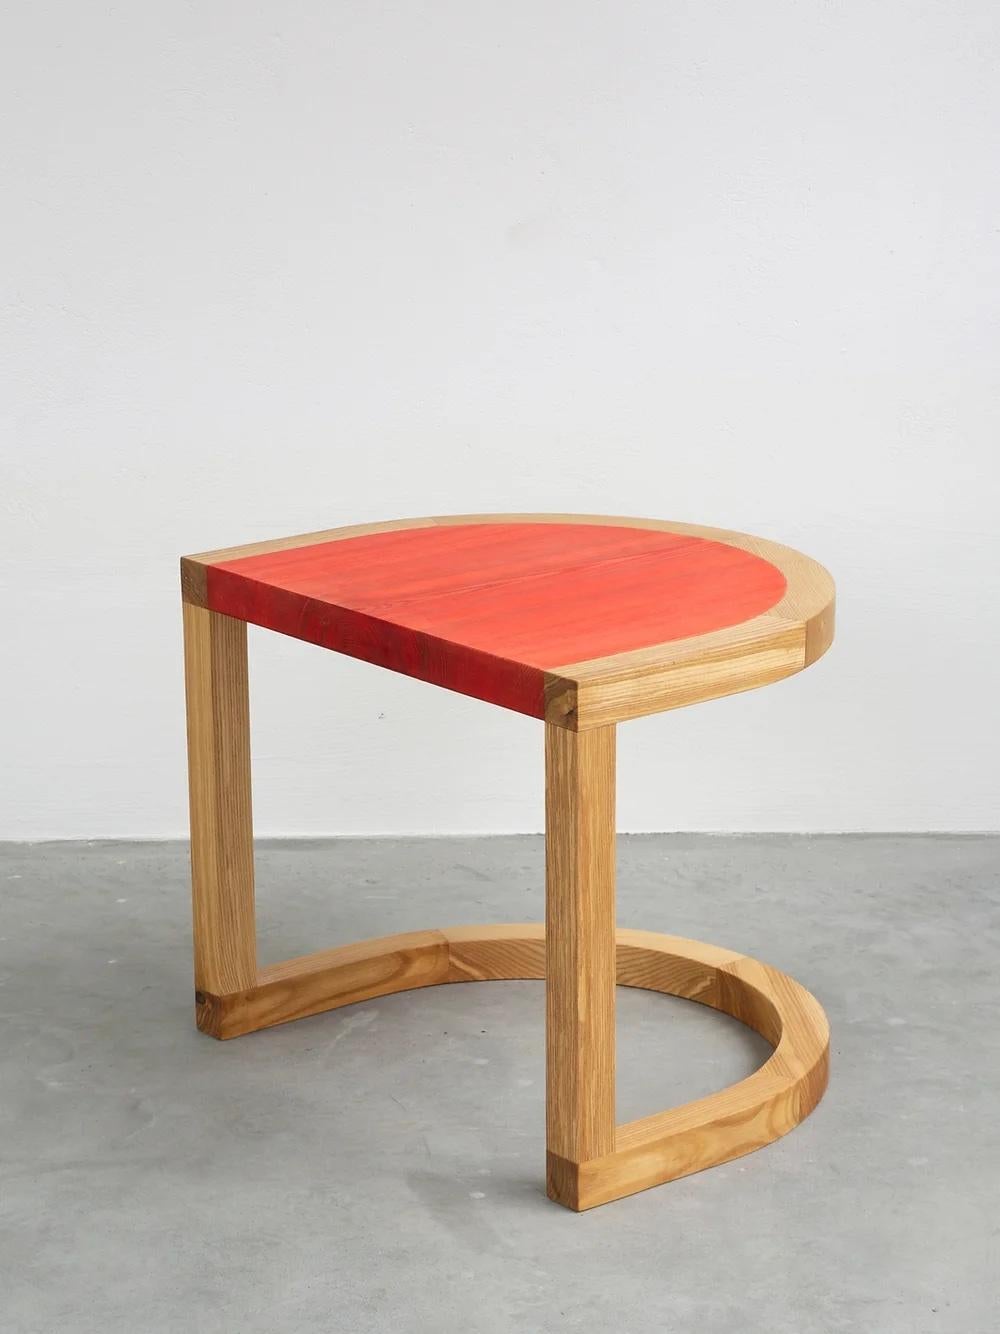 TRN Side Table
Model shown: TRN 1, Red and natural wood

Material: Ash wood, covered with a natural wax 
Care: Clean with a dry cloth, no water, no direct sunlight 

Dimensions: 
H: 45 cm (17,7